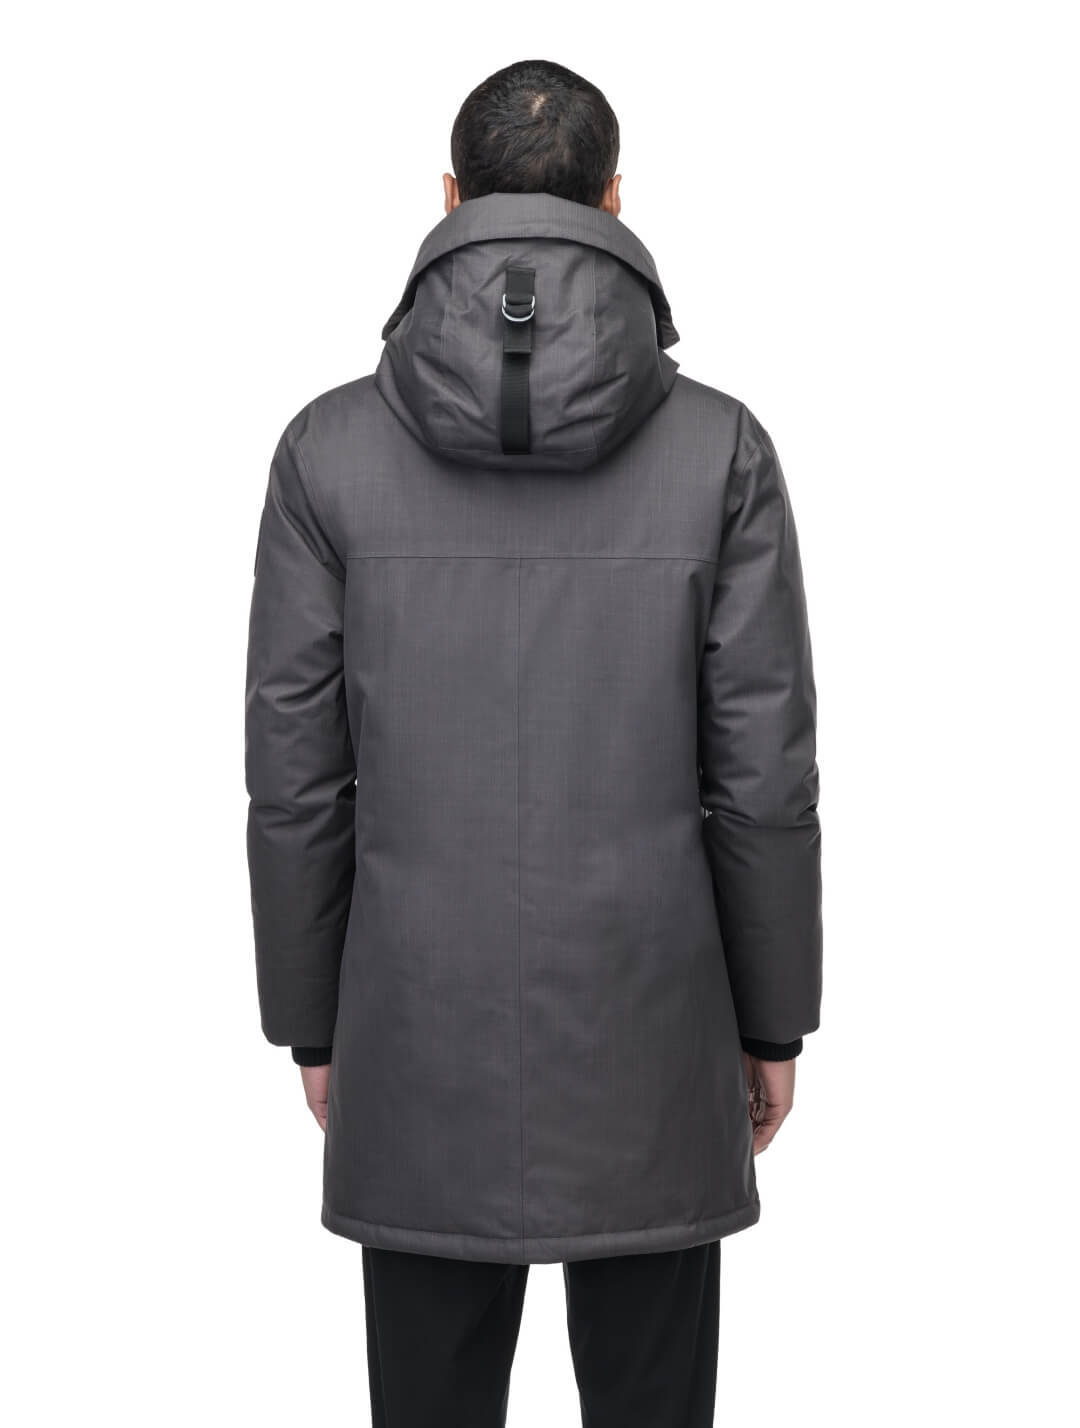 Men's slim fitting waist length parka with removable fur trim on the hood and two waist patch pockets in CH Steel Grey